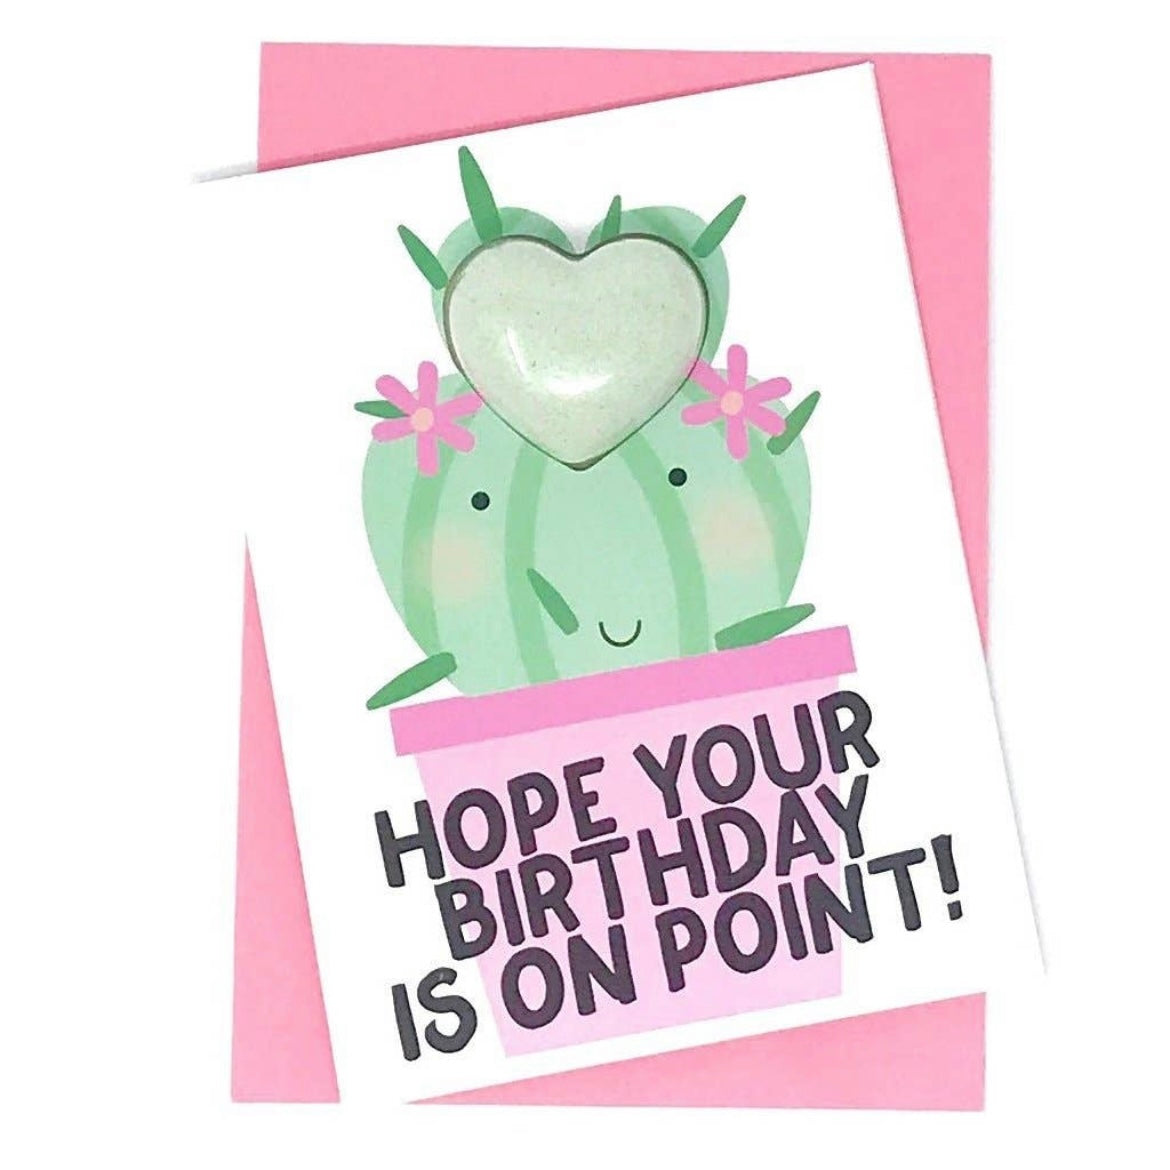 Bath Bomb Greeting Card- Hope Your Birthday is on Point!